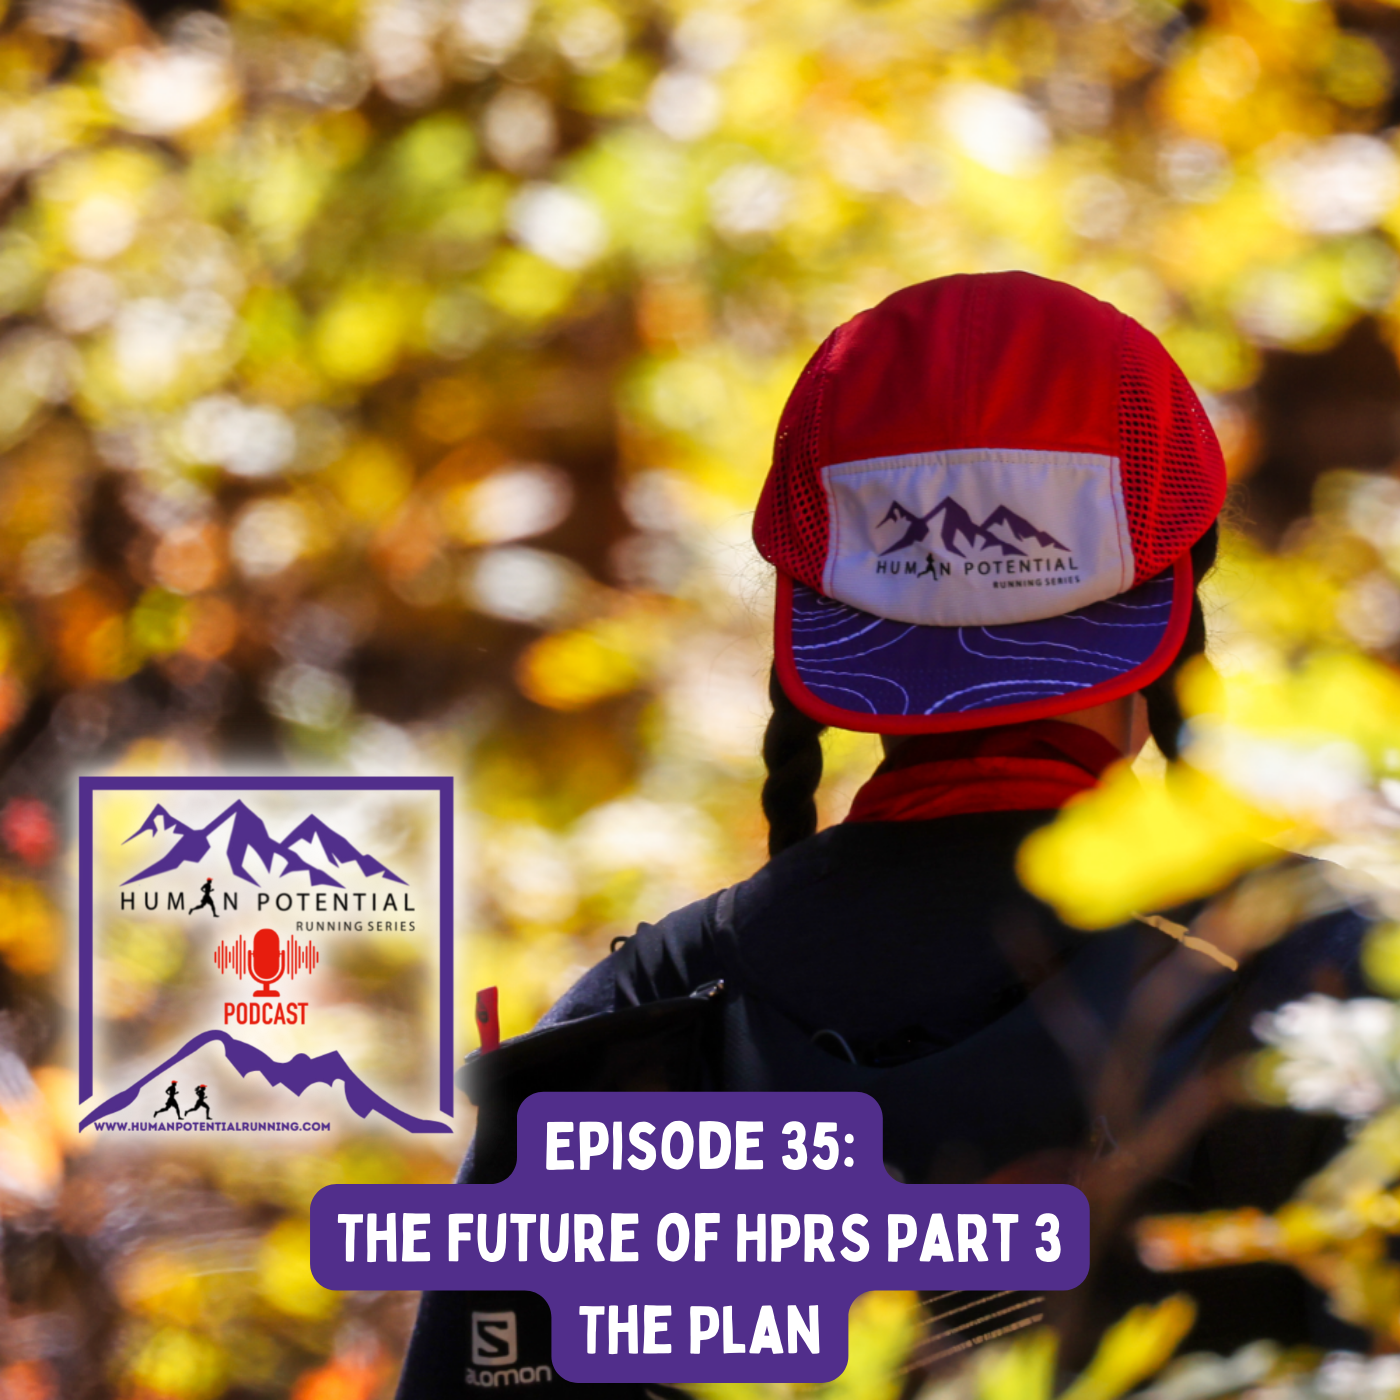 HPRS Podcast – Episode 35: The Future of HPRS Part 3 – The Plan